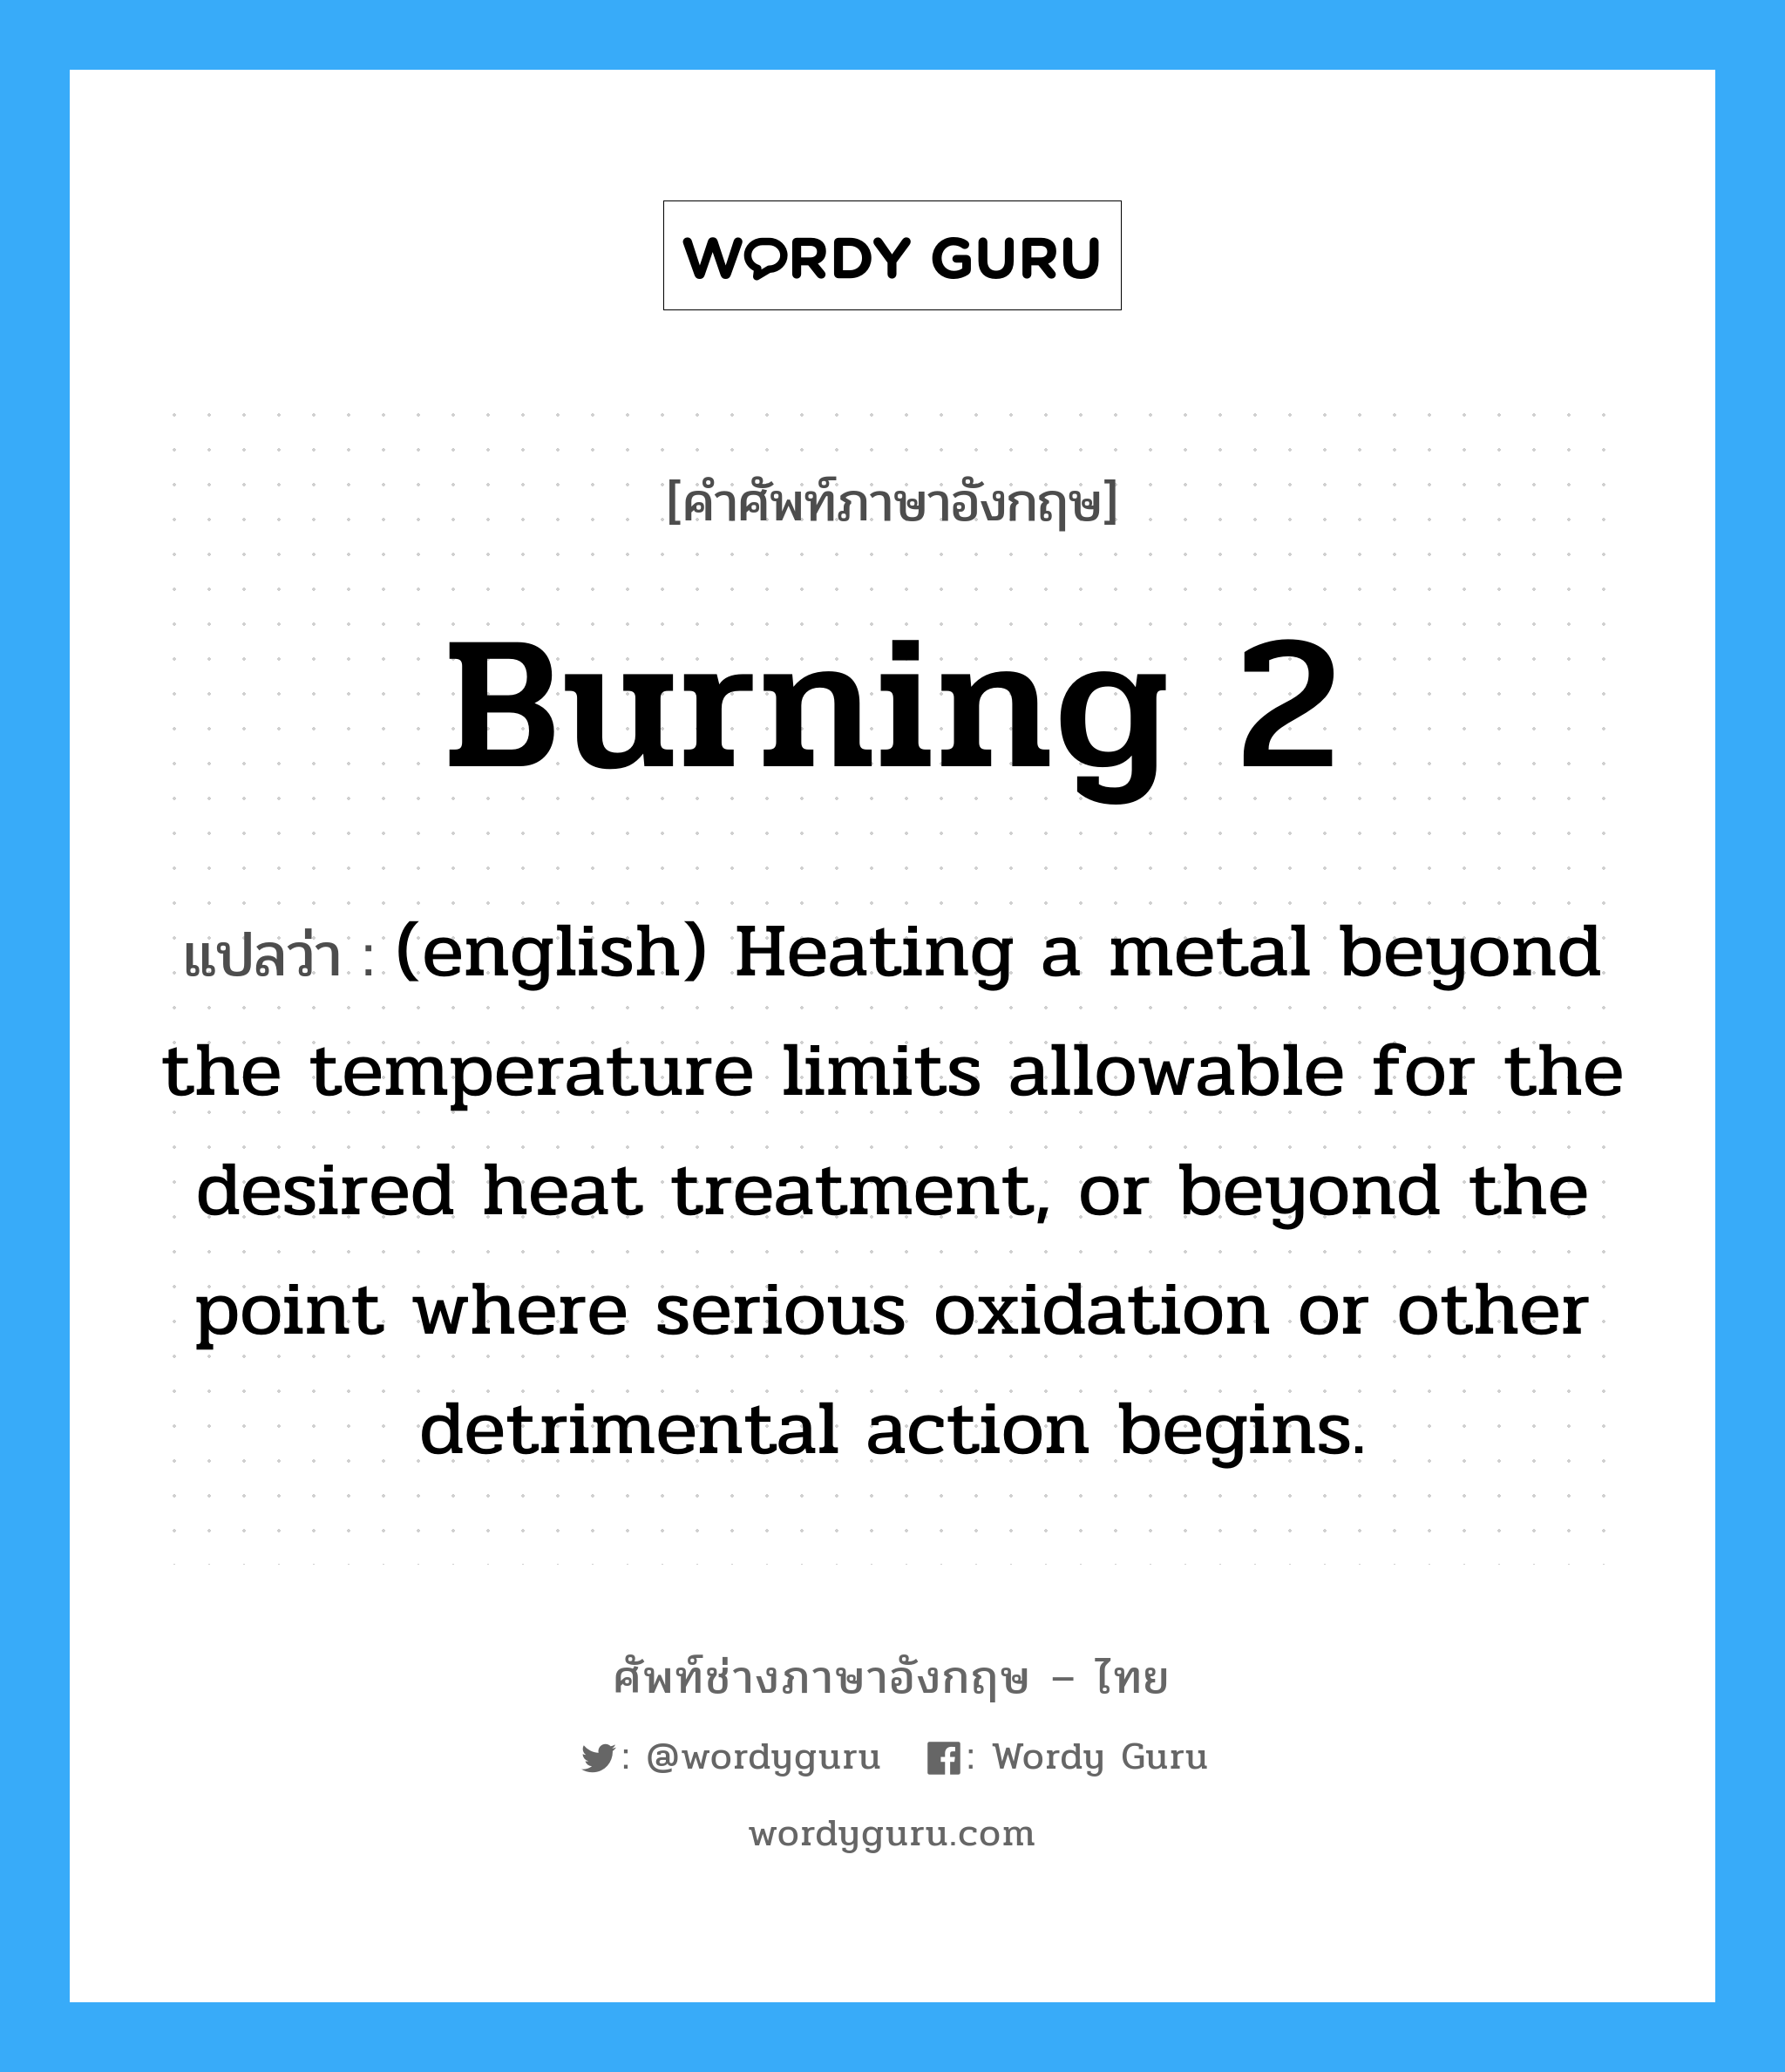 (english) Heating a metal beyond the temperature limits allowable for the desired heat treatment, or beyond the point where serious oxidation or other detrimental action begins. ภาษาอังกฤษ?, คำศัพท์ช่างภาษาอังกฤษ - ไทย (english) Heating a metal beyond the temperature limits allowable for the desired heat treatment, or beyond the point where serious oxidation or other detrimental action begins. คำศัพท์ภาษาอังกฤษ (english) Heating a metal beyond the temperature limits allowable for the desired heat treatment, or beyond the point where serious oxidation or other detrimental action begins. แปลว่า Burning 2